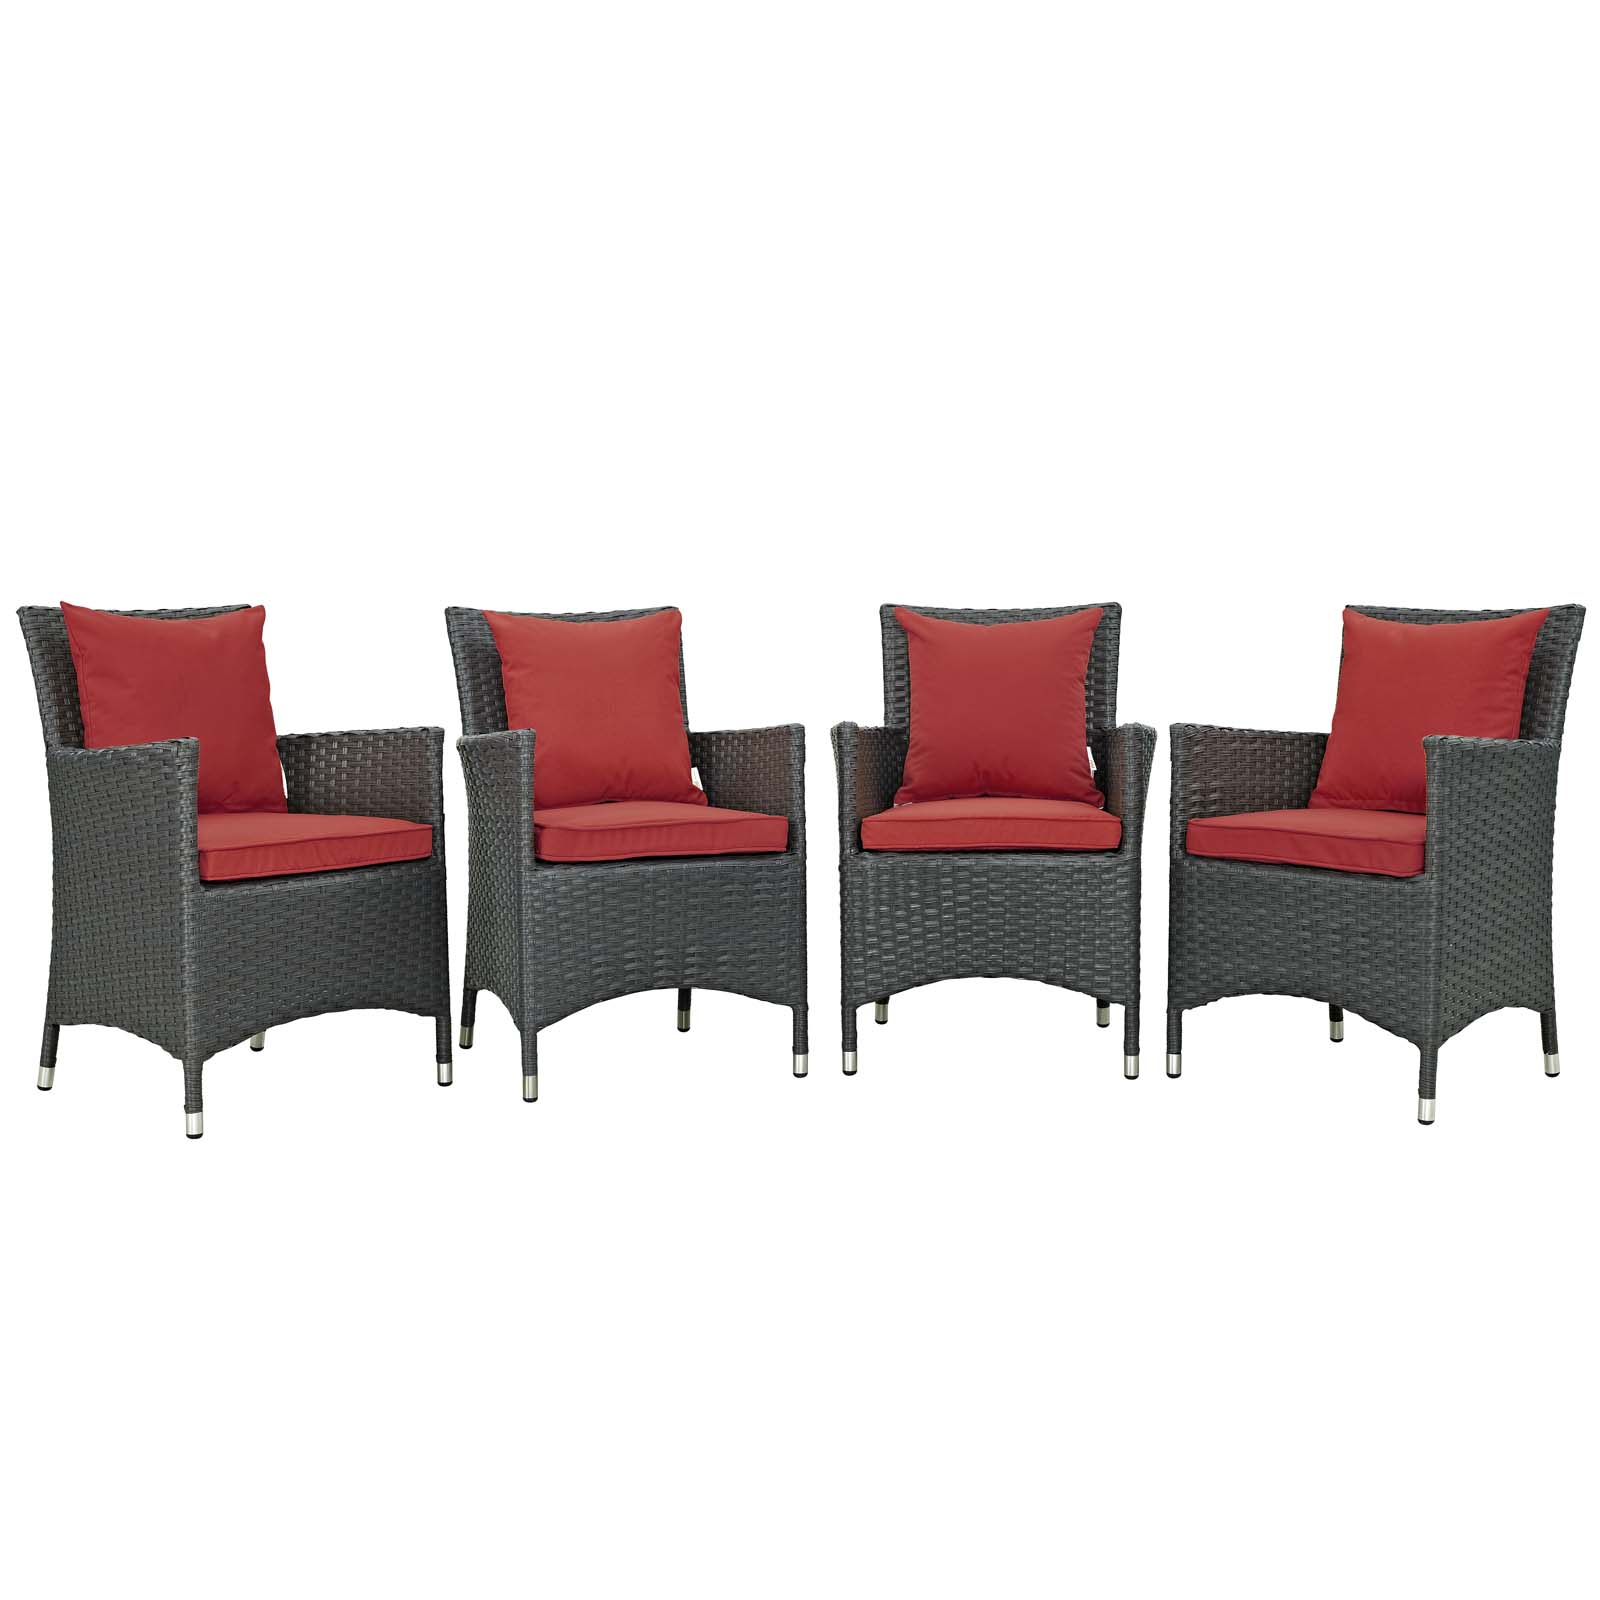 Modway Sojourn 4 Piece Outdoor Patio Sunbrella® Dining Set in Canvas Red - image 2 of 5